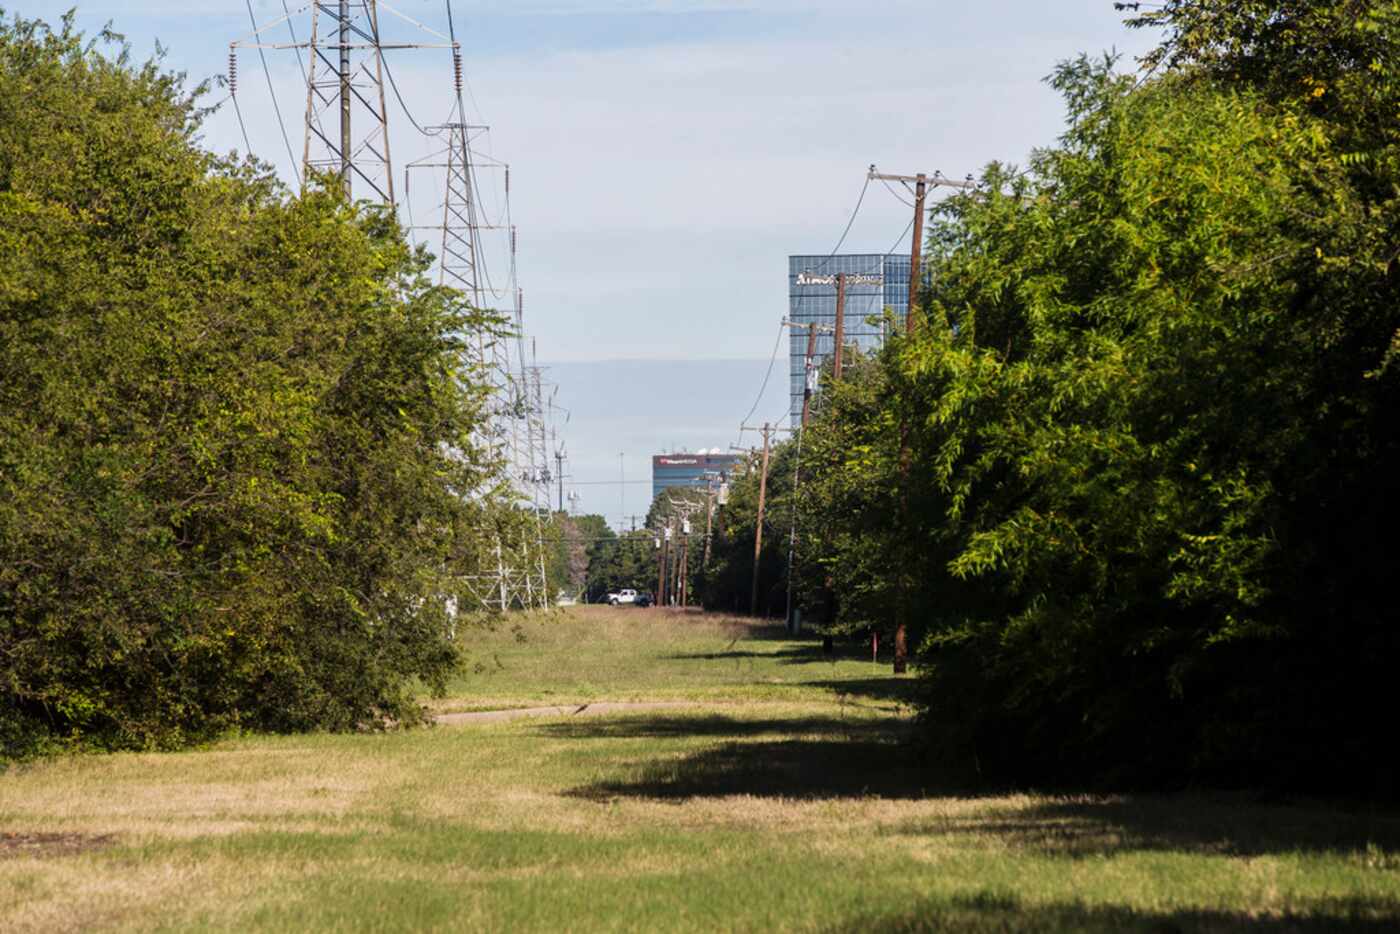 Before the transmission lines are replaced, these trees have to go. According to Oncor.